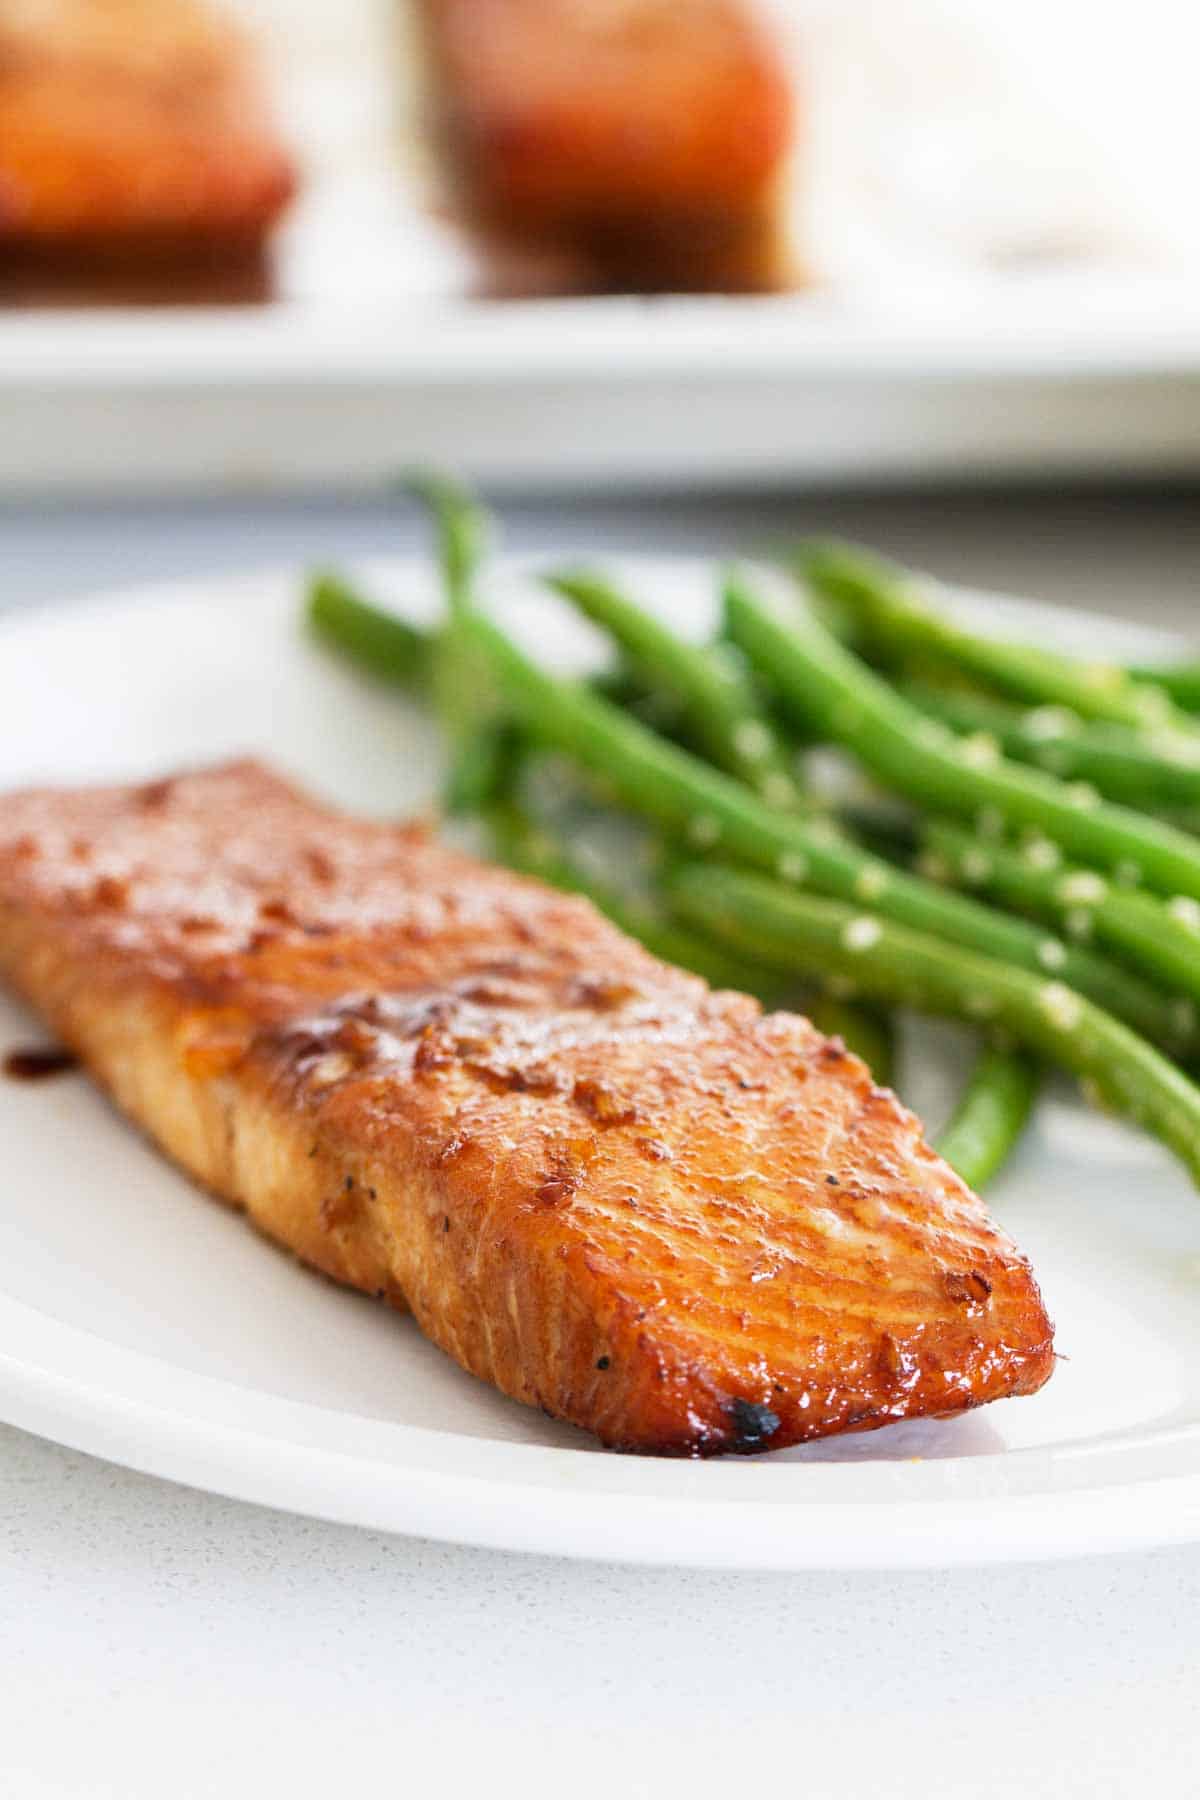 Soy Ginger Salmon on a plate served with green beans.